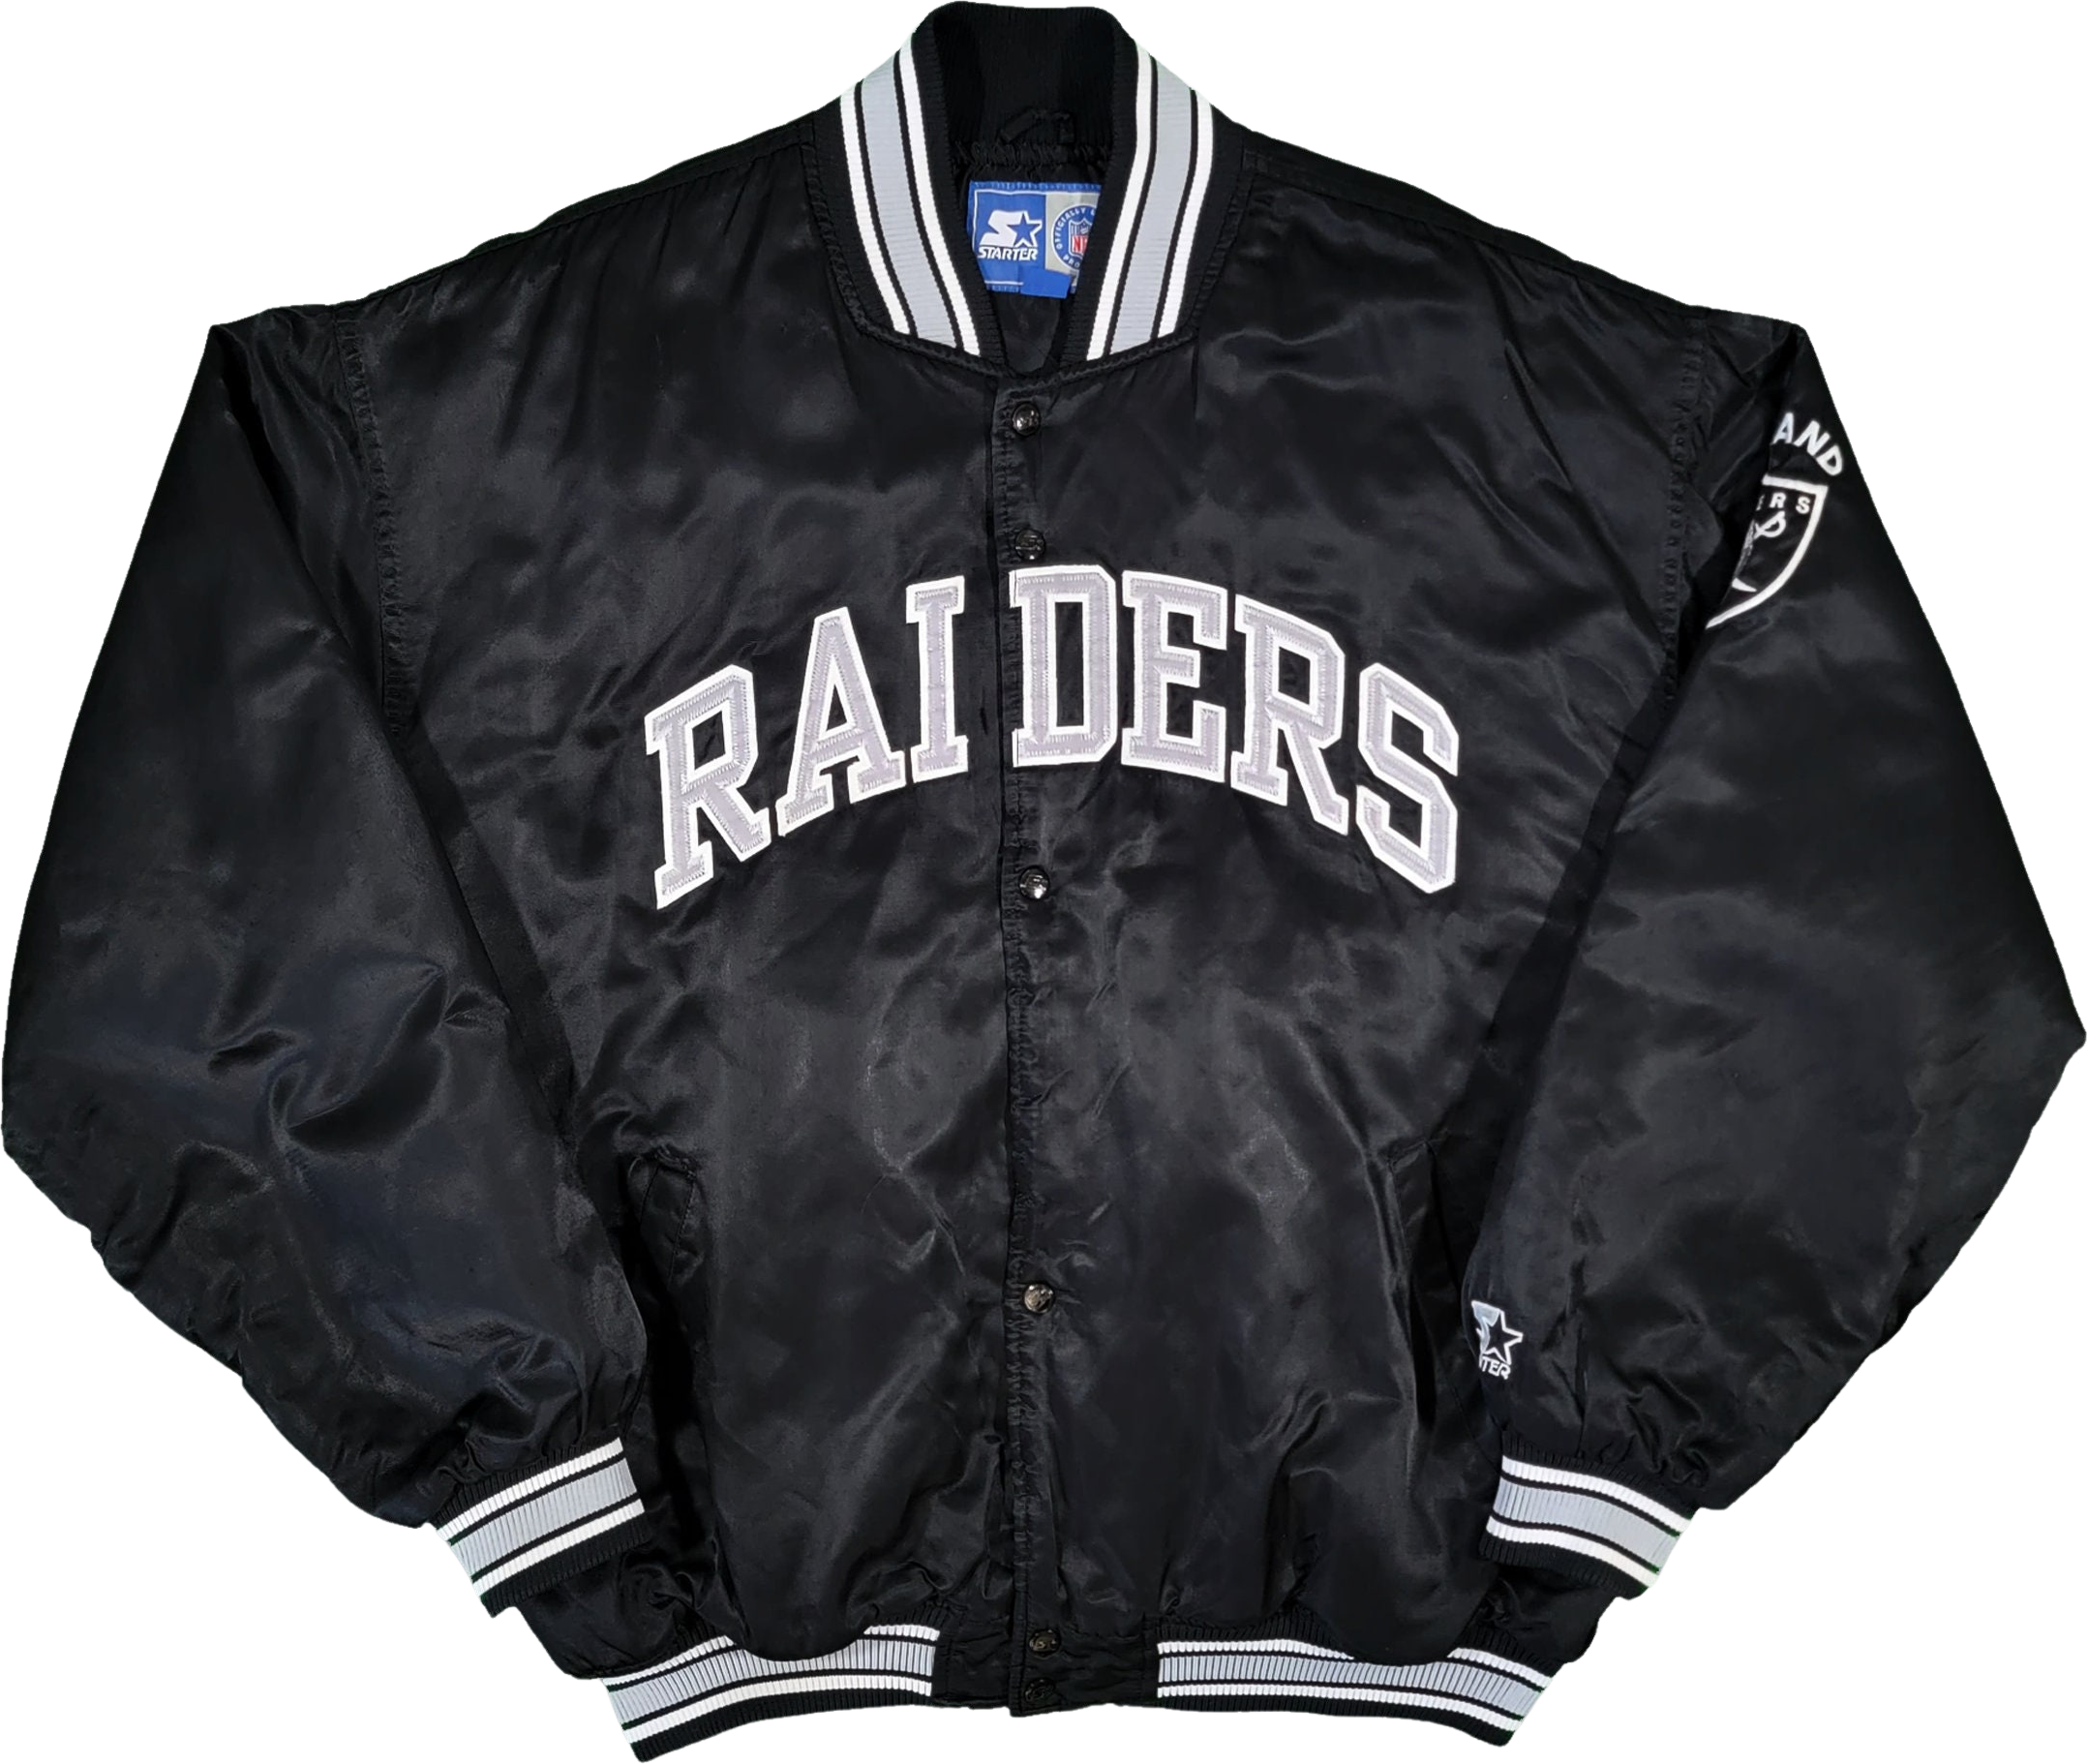 Oakland Raiders Vintage 90s Starter Satin Bomber Jacket Nfl Football Black  and Silver Coat Stitched Logos Size 2xl by Starter